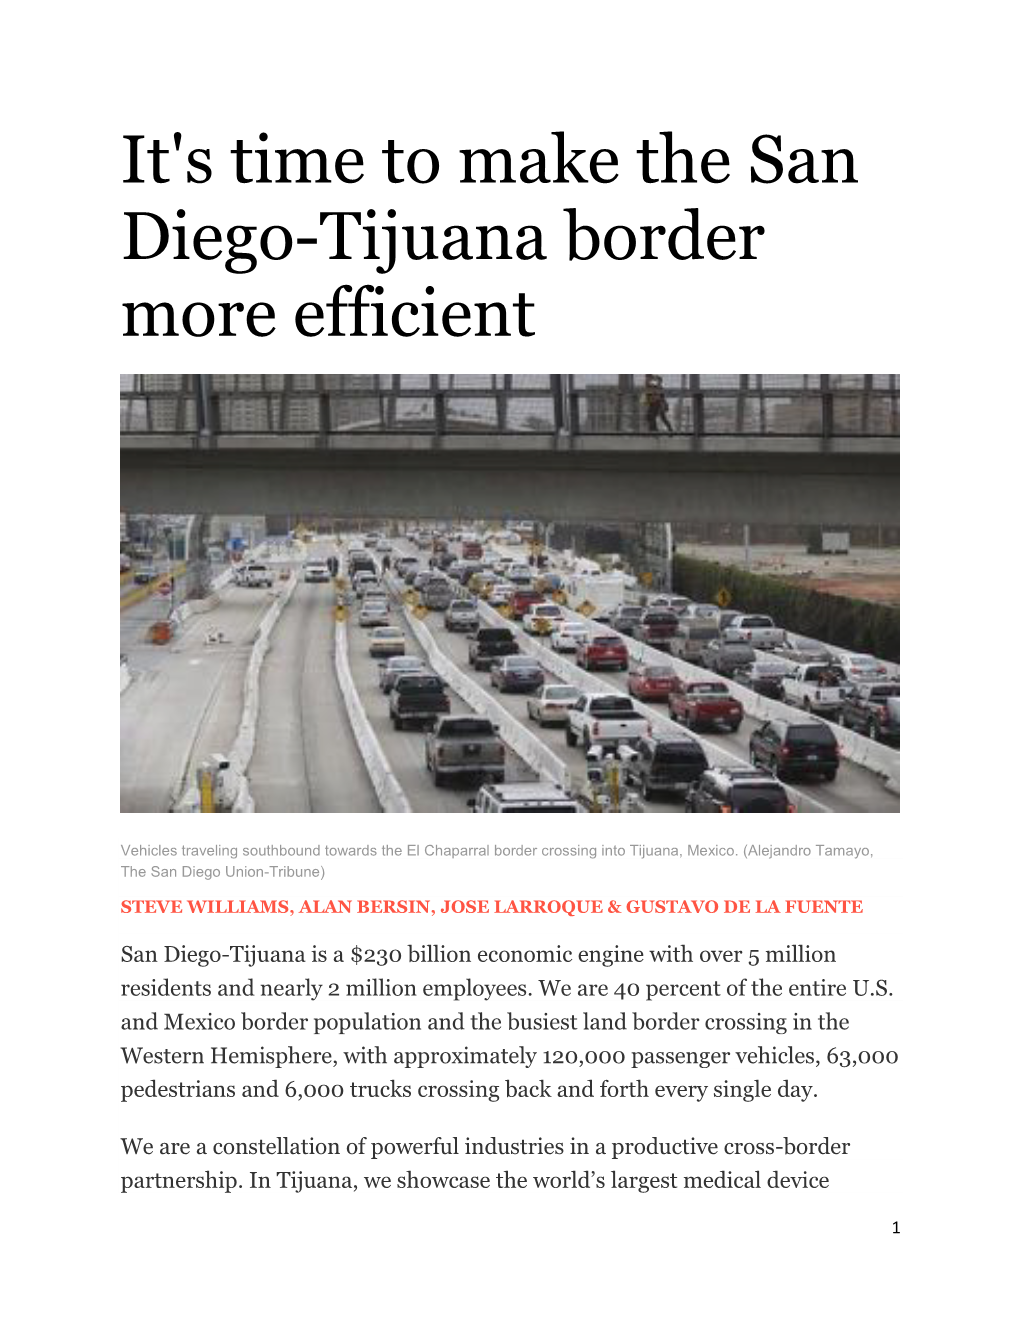 It's Time to Make the San Diego-Tijuana Border More Efficient